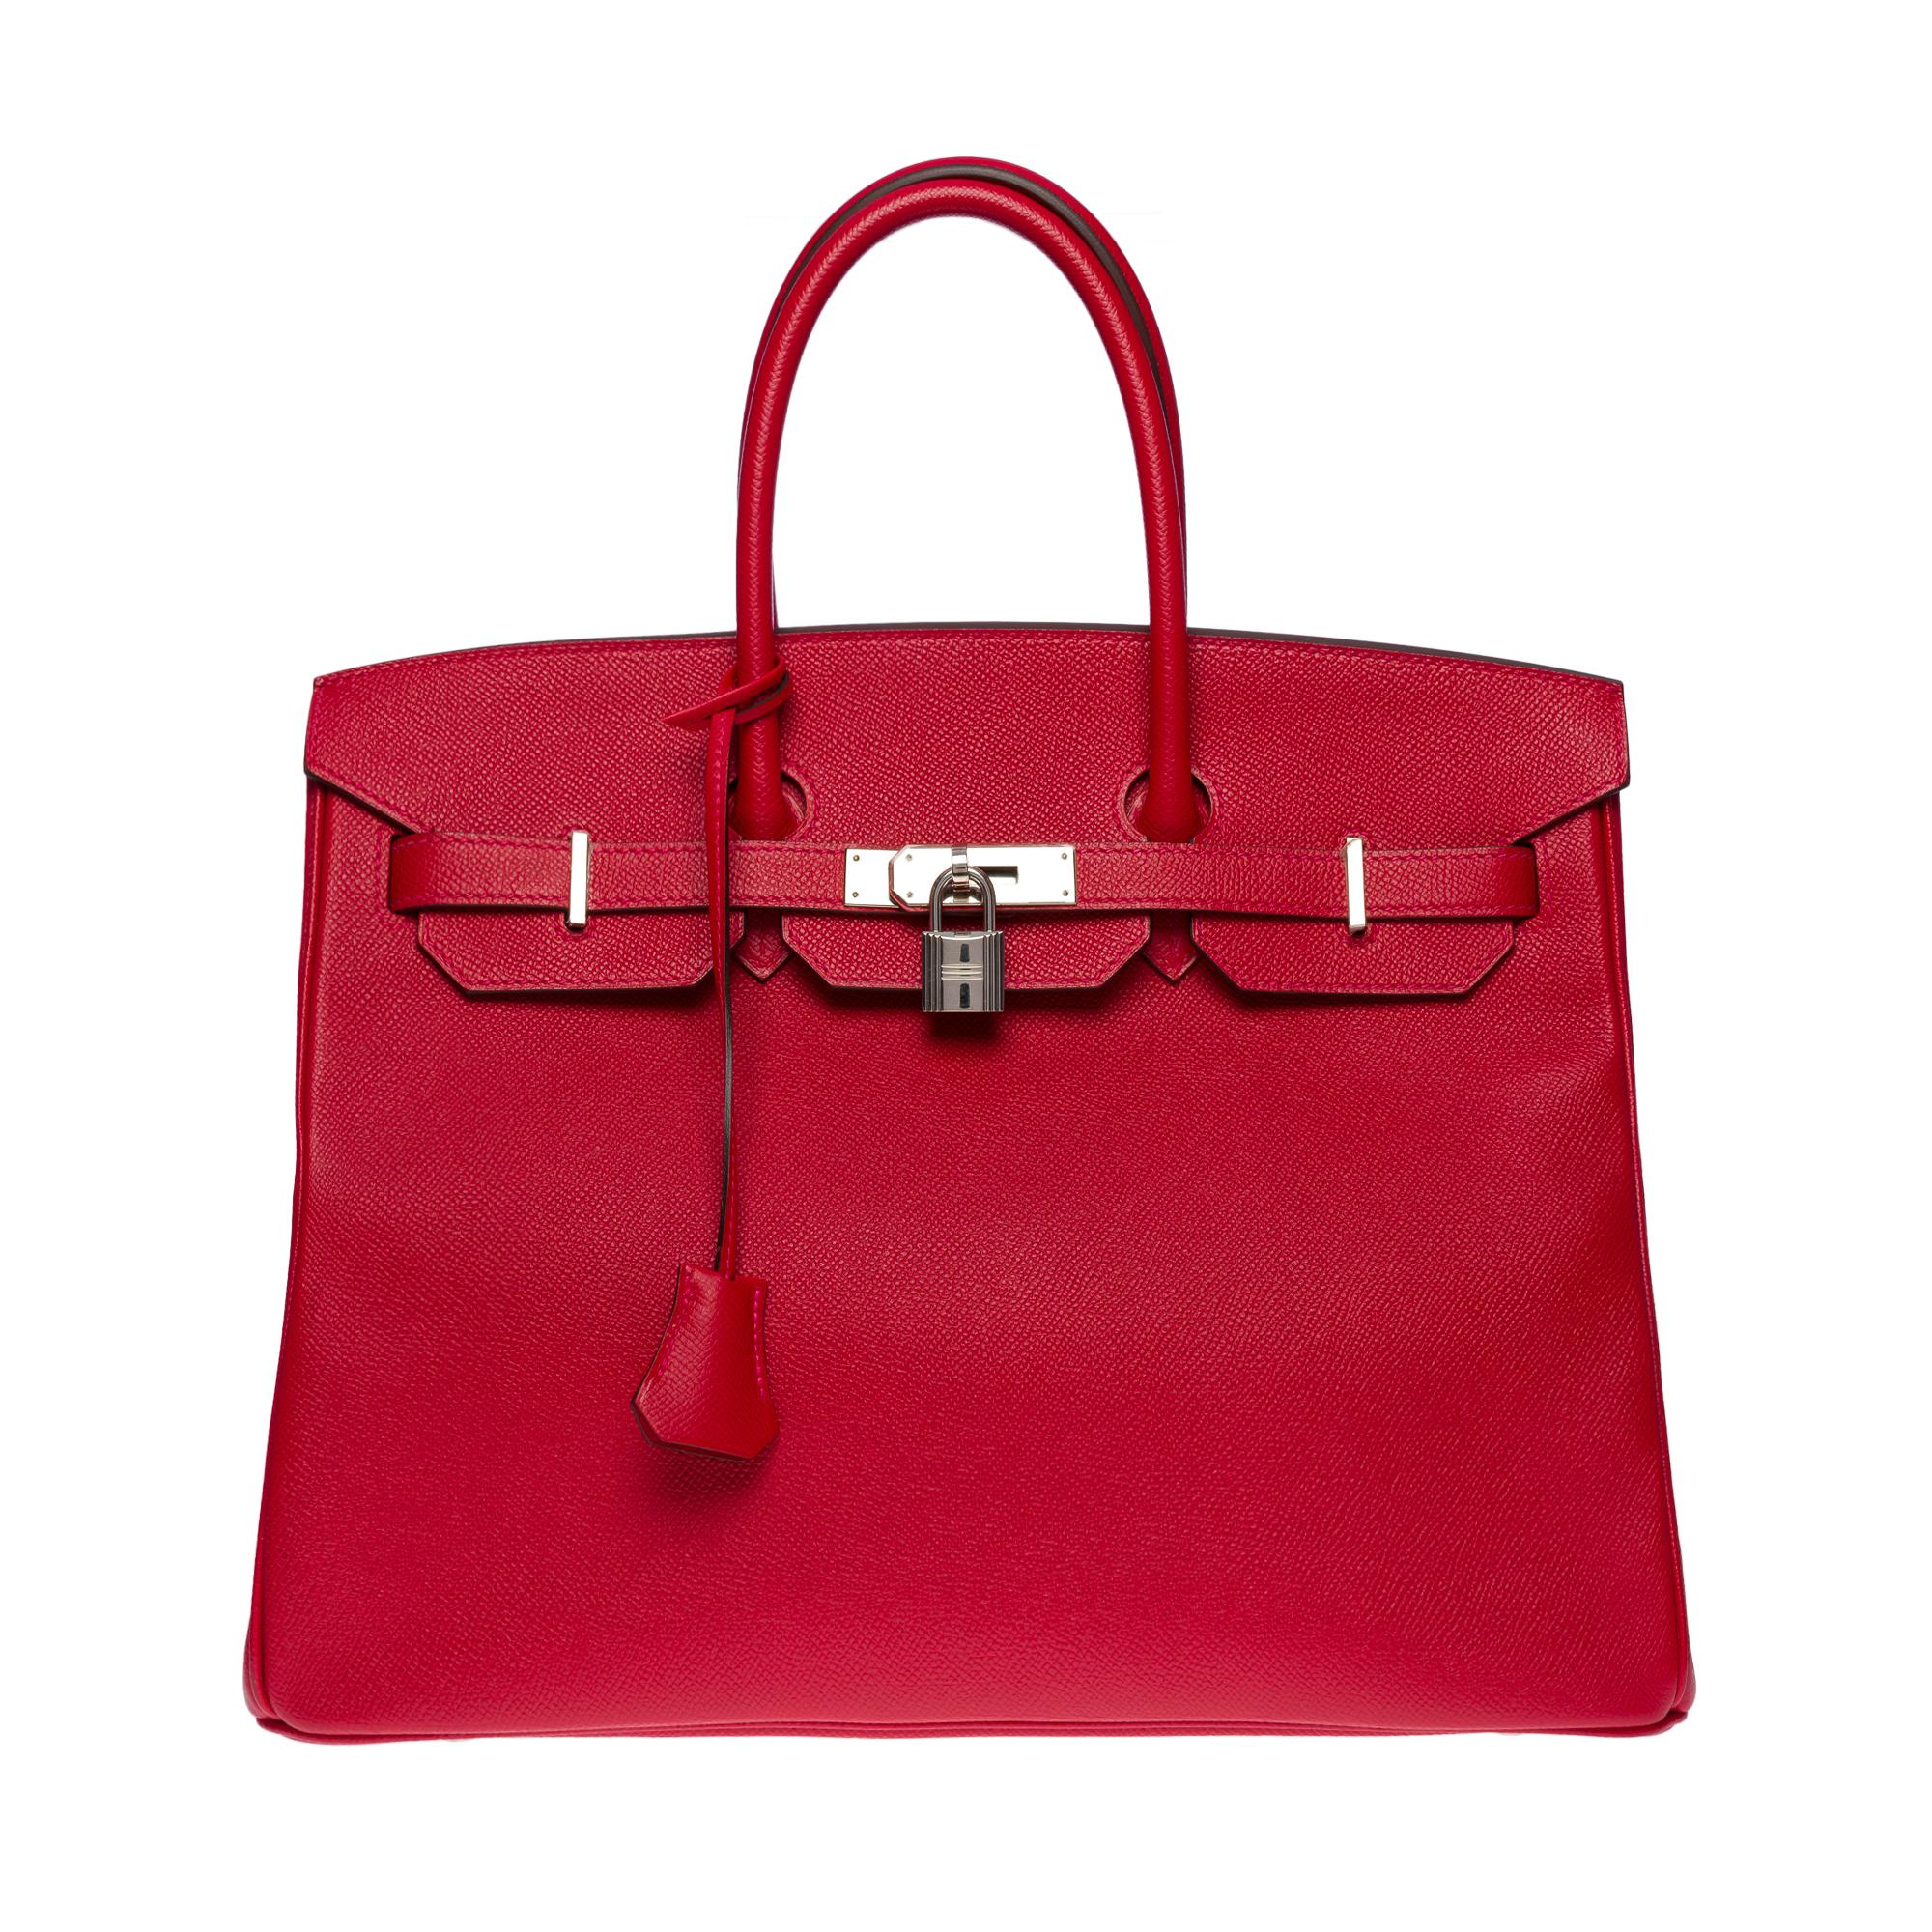 Exceptional Hermes Birkin 35 handbag in Rouge Casaque Epsom leather, palladium silver metal hardware, double handle in red leather allowing a hand-carry

Flap closure
Red leather lining, one zippered pocket, one patch pocket
Signature: 